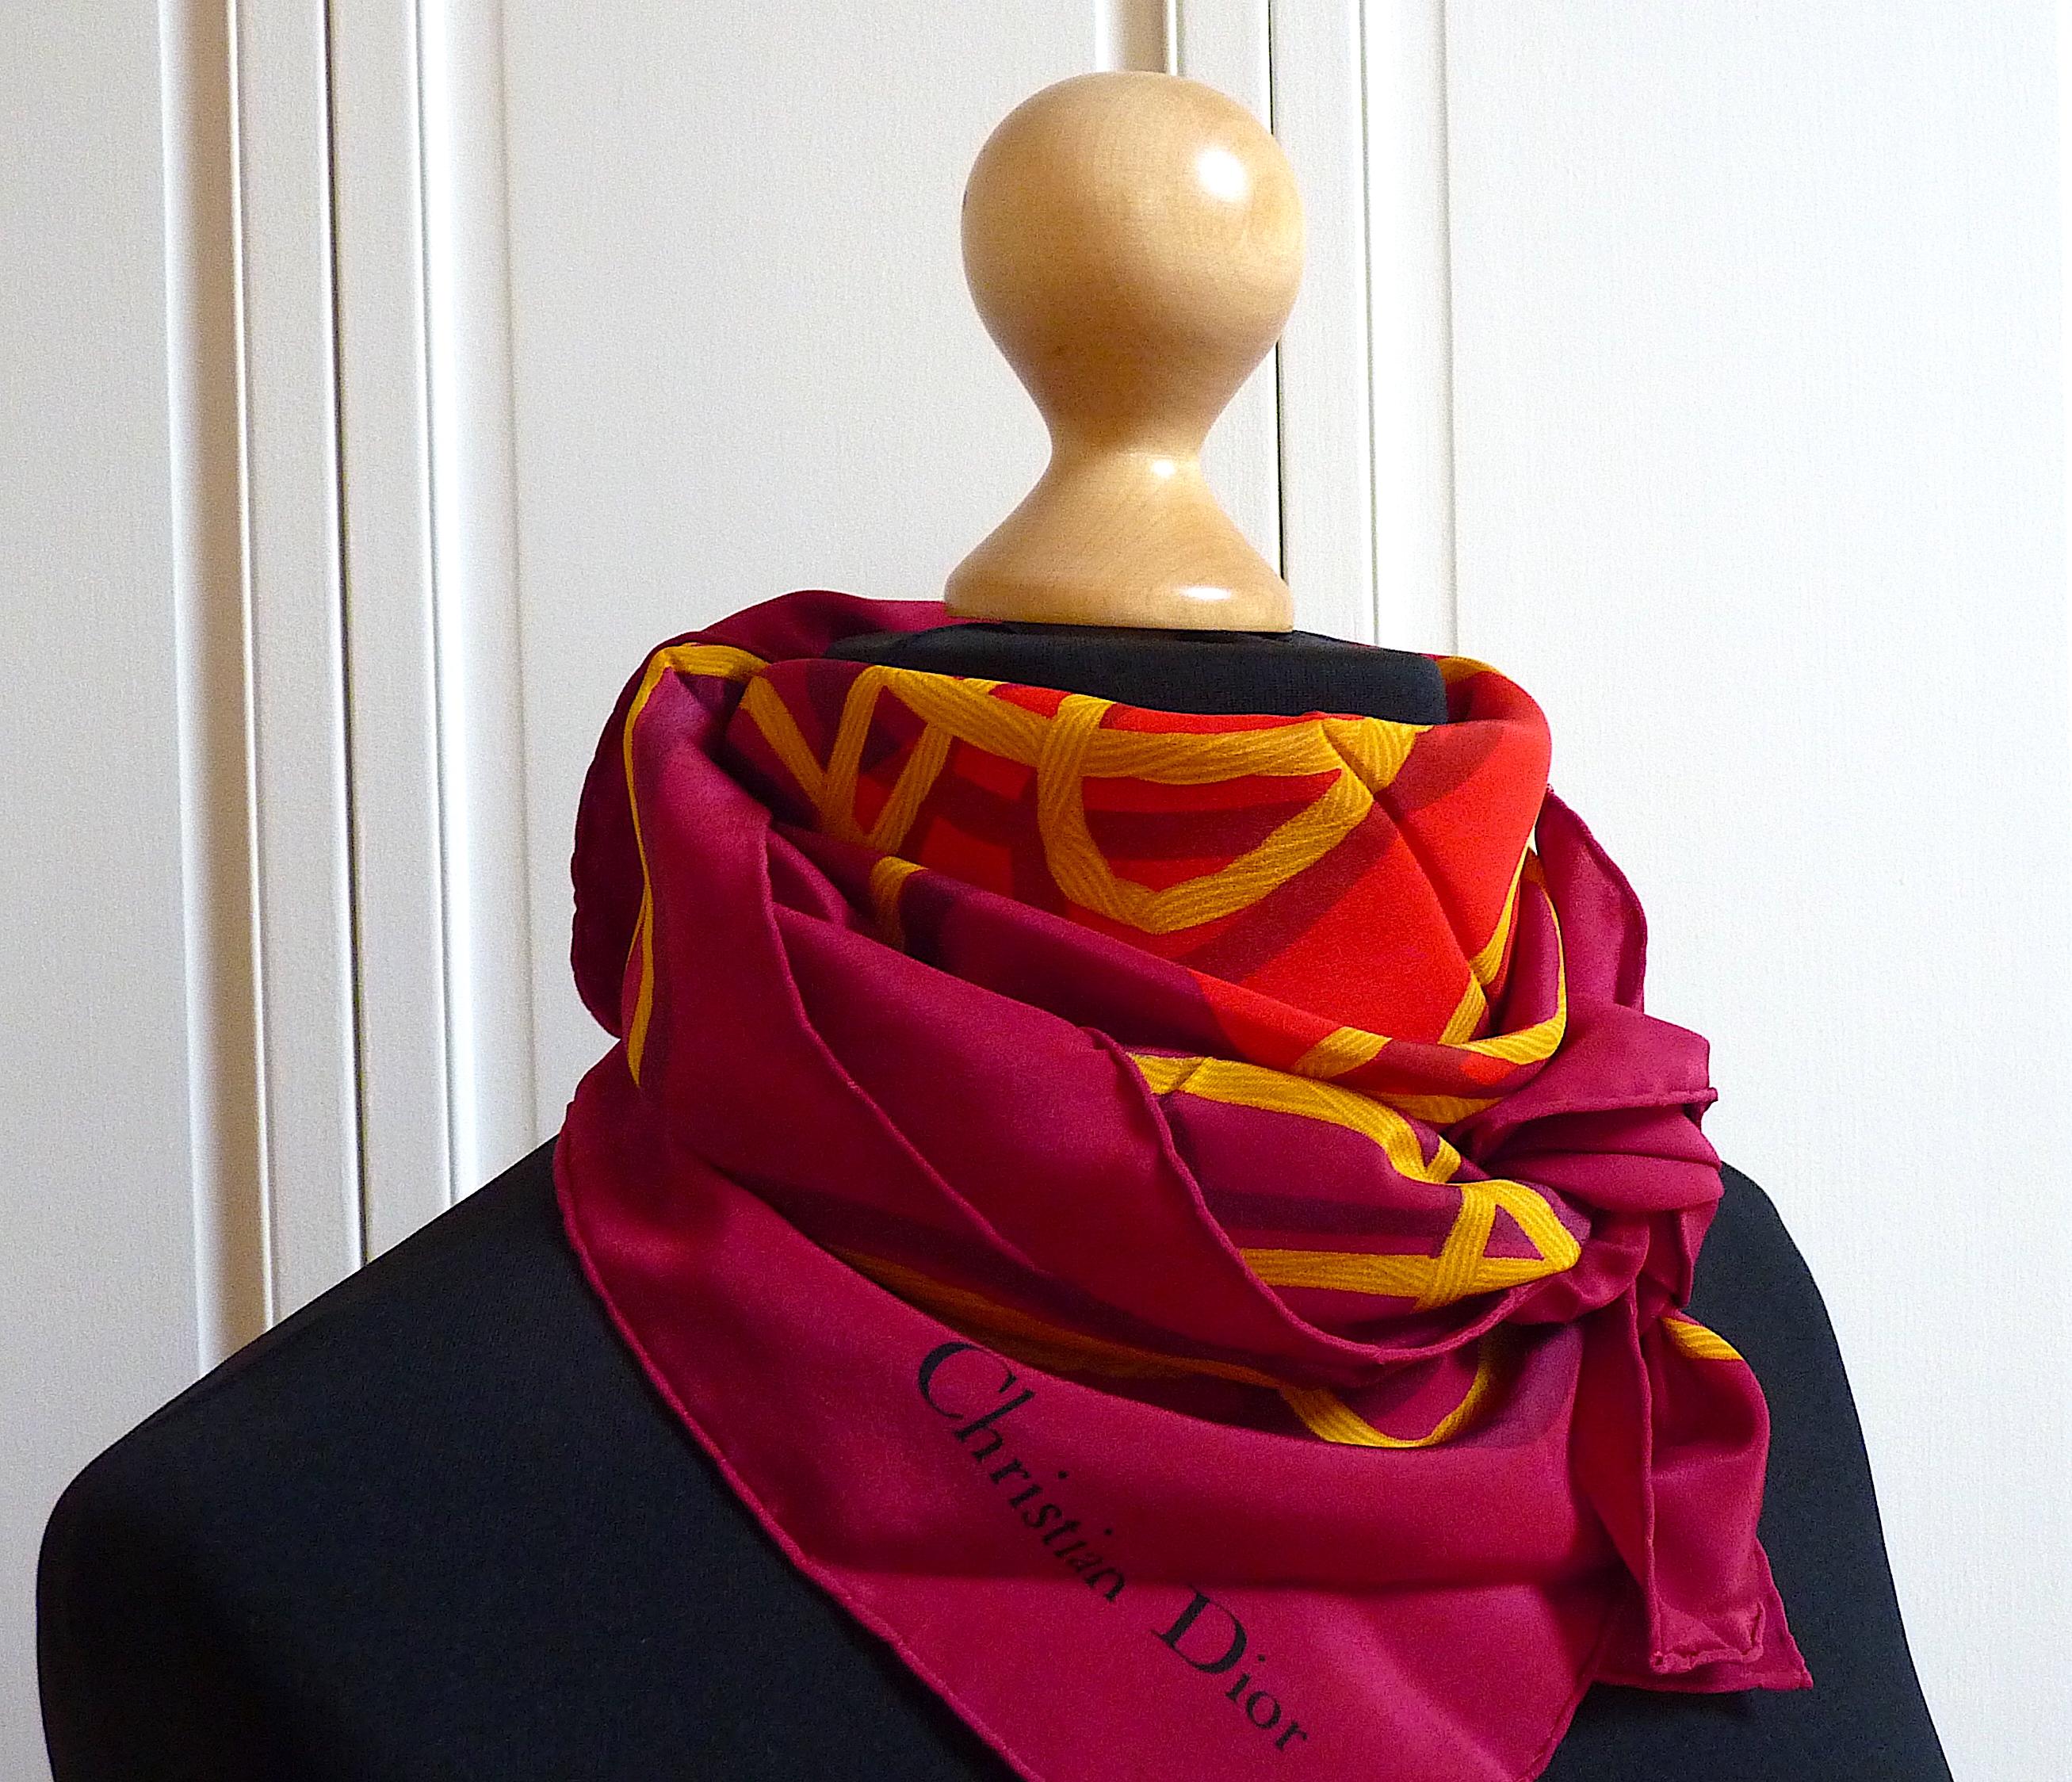 This is a Vintage DIOR  Silk Scarf, featuring a central gold Medallion written Maison christian Dior Paris 30 Avenue Montaigne and the name DIOR in gold Letters upper side

Signed Christian Dior in the bottom right corner

100% silk, no